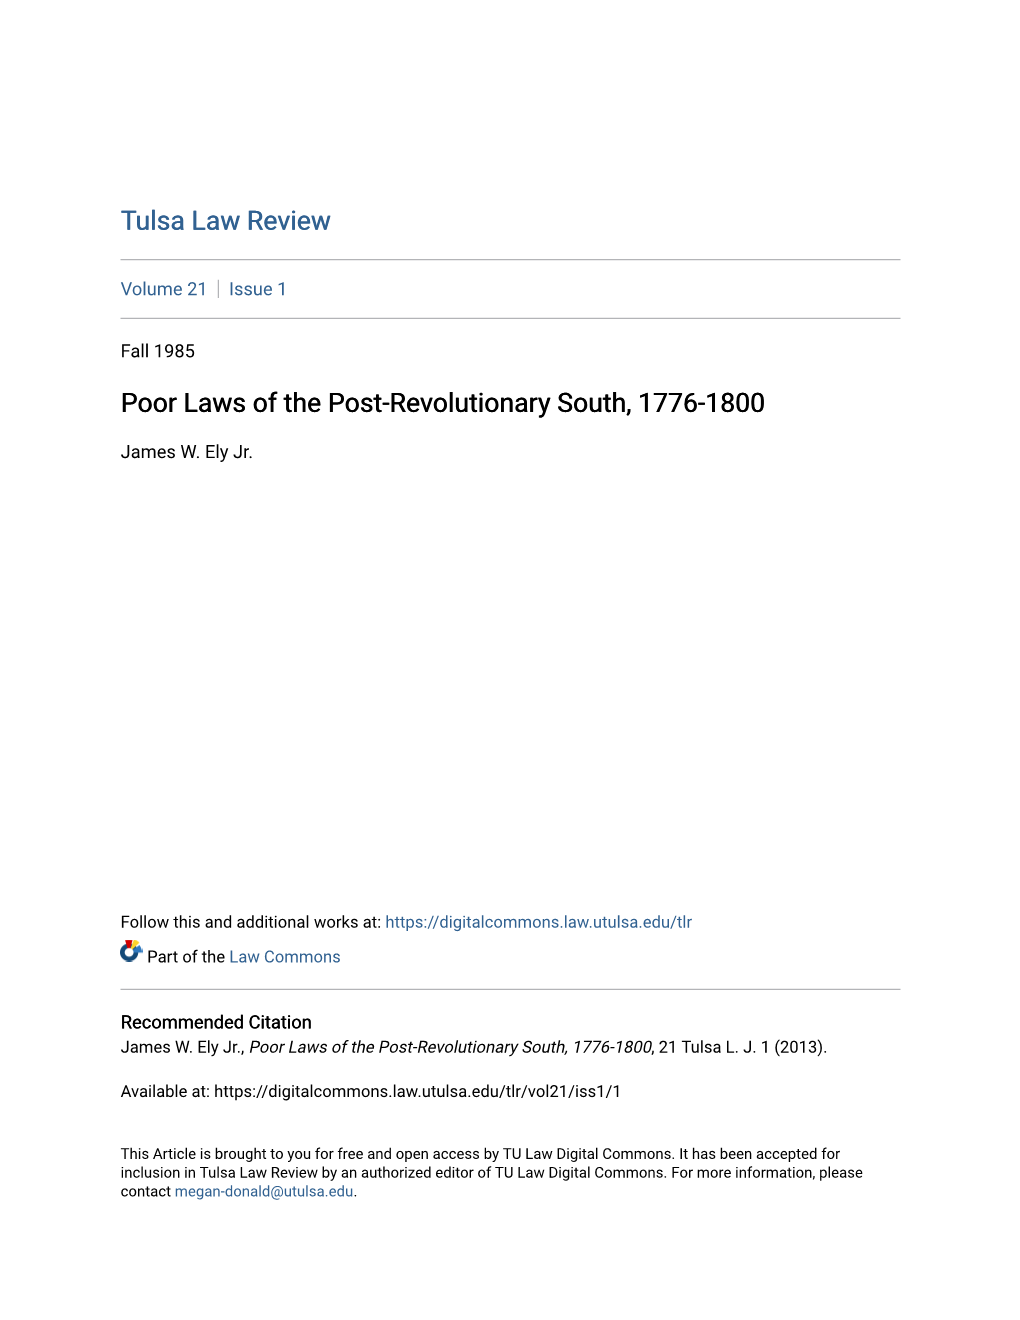 Poor Laws of the Post-Revolutionary South, 1776-1800